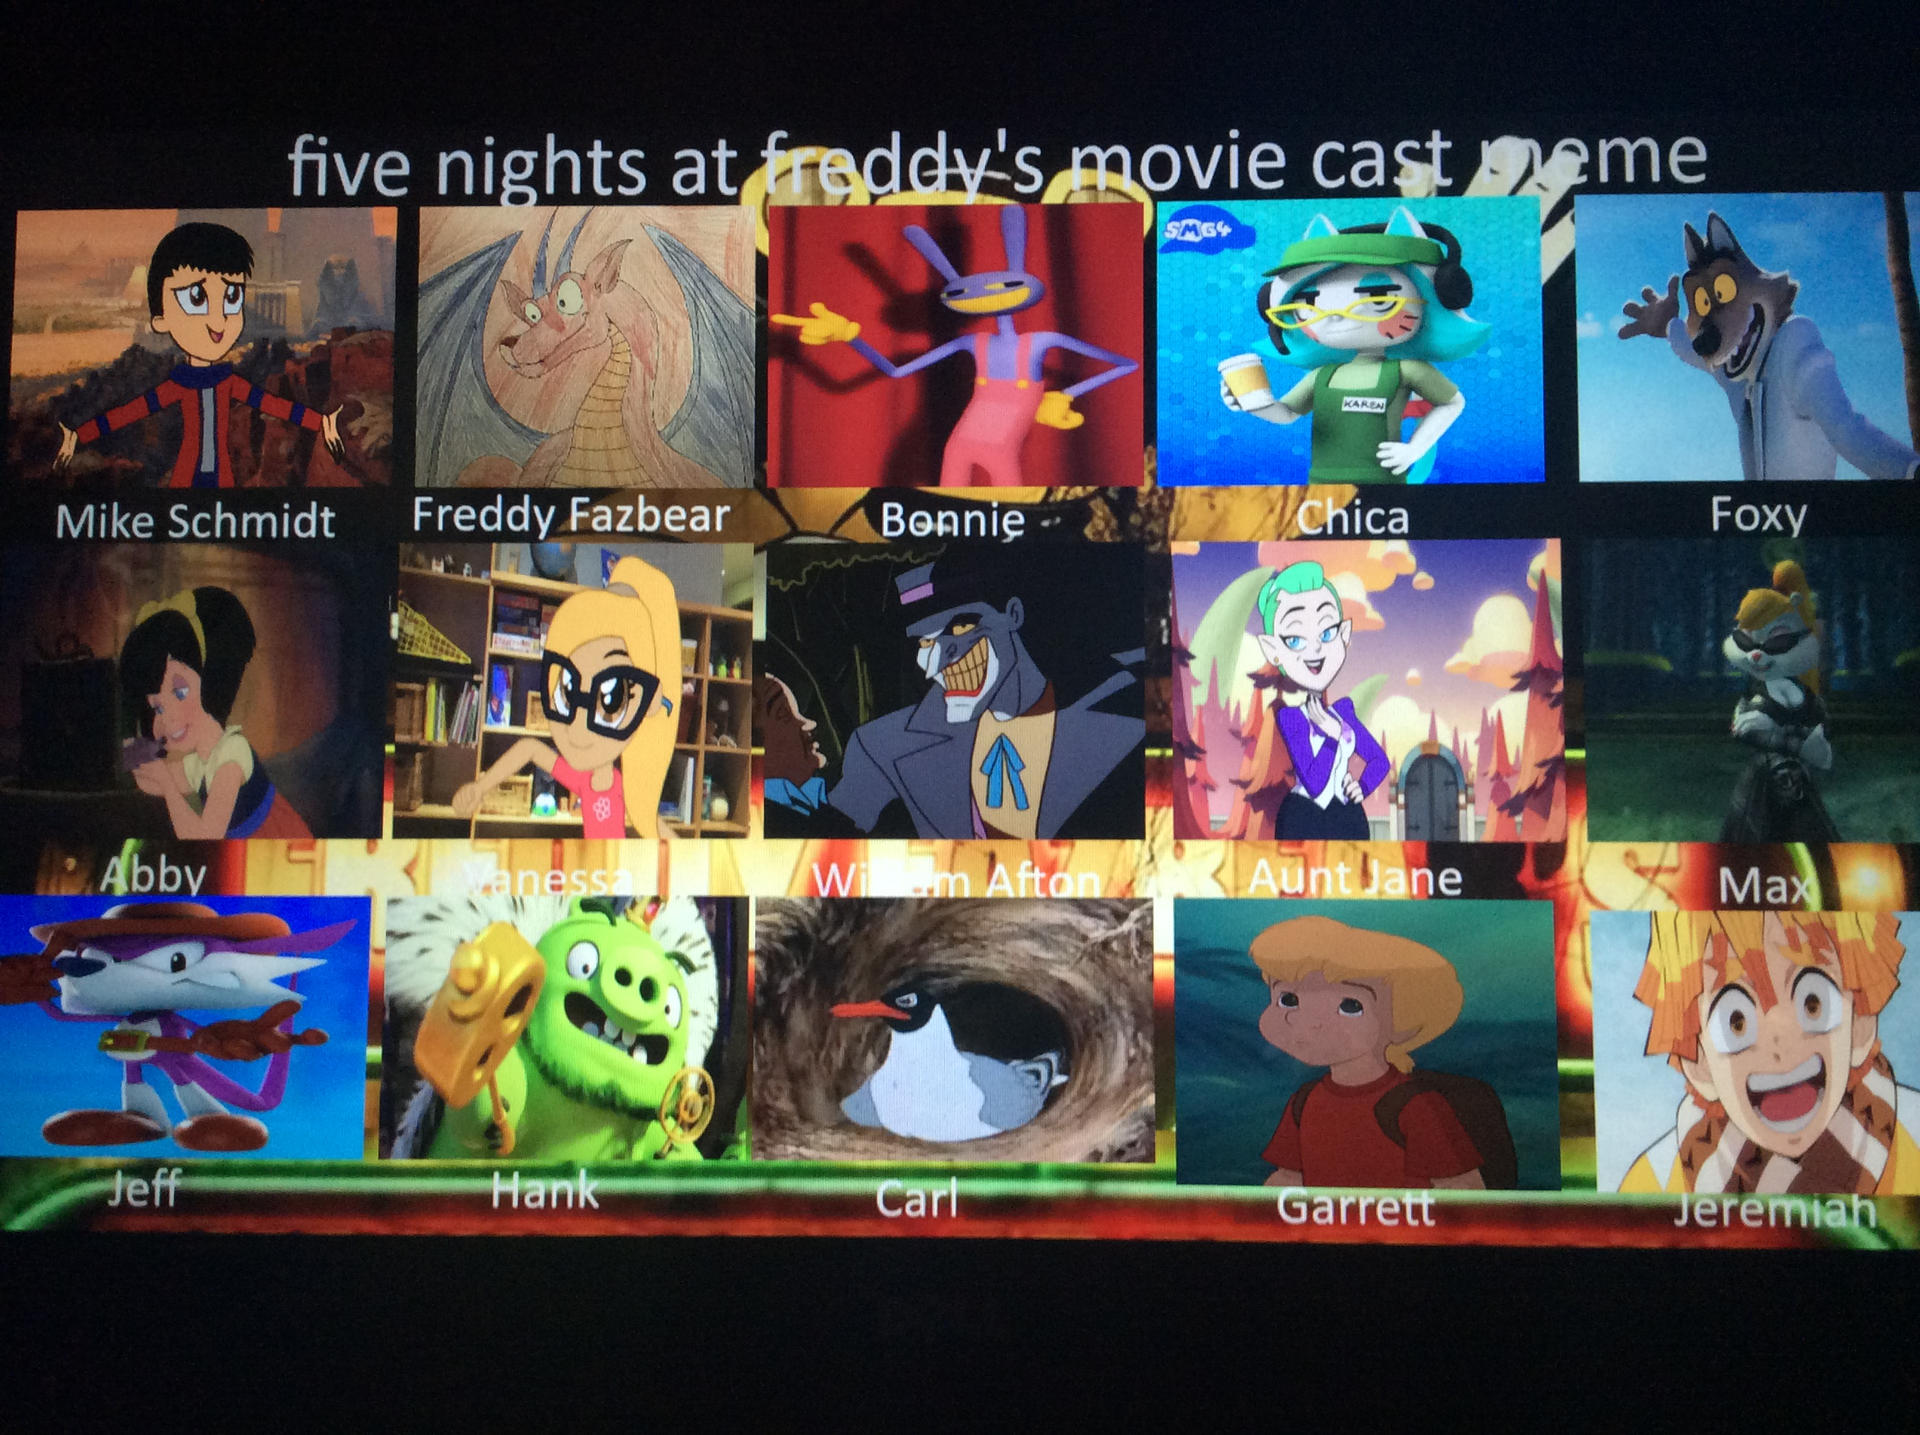 Five Nights At Freddy's Filme Completo by yra255 on DeviantArt